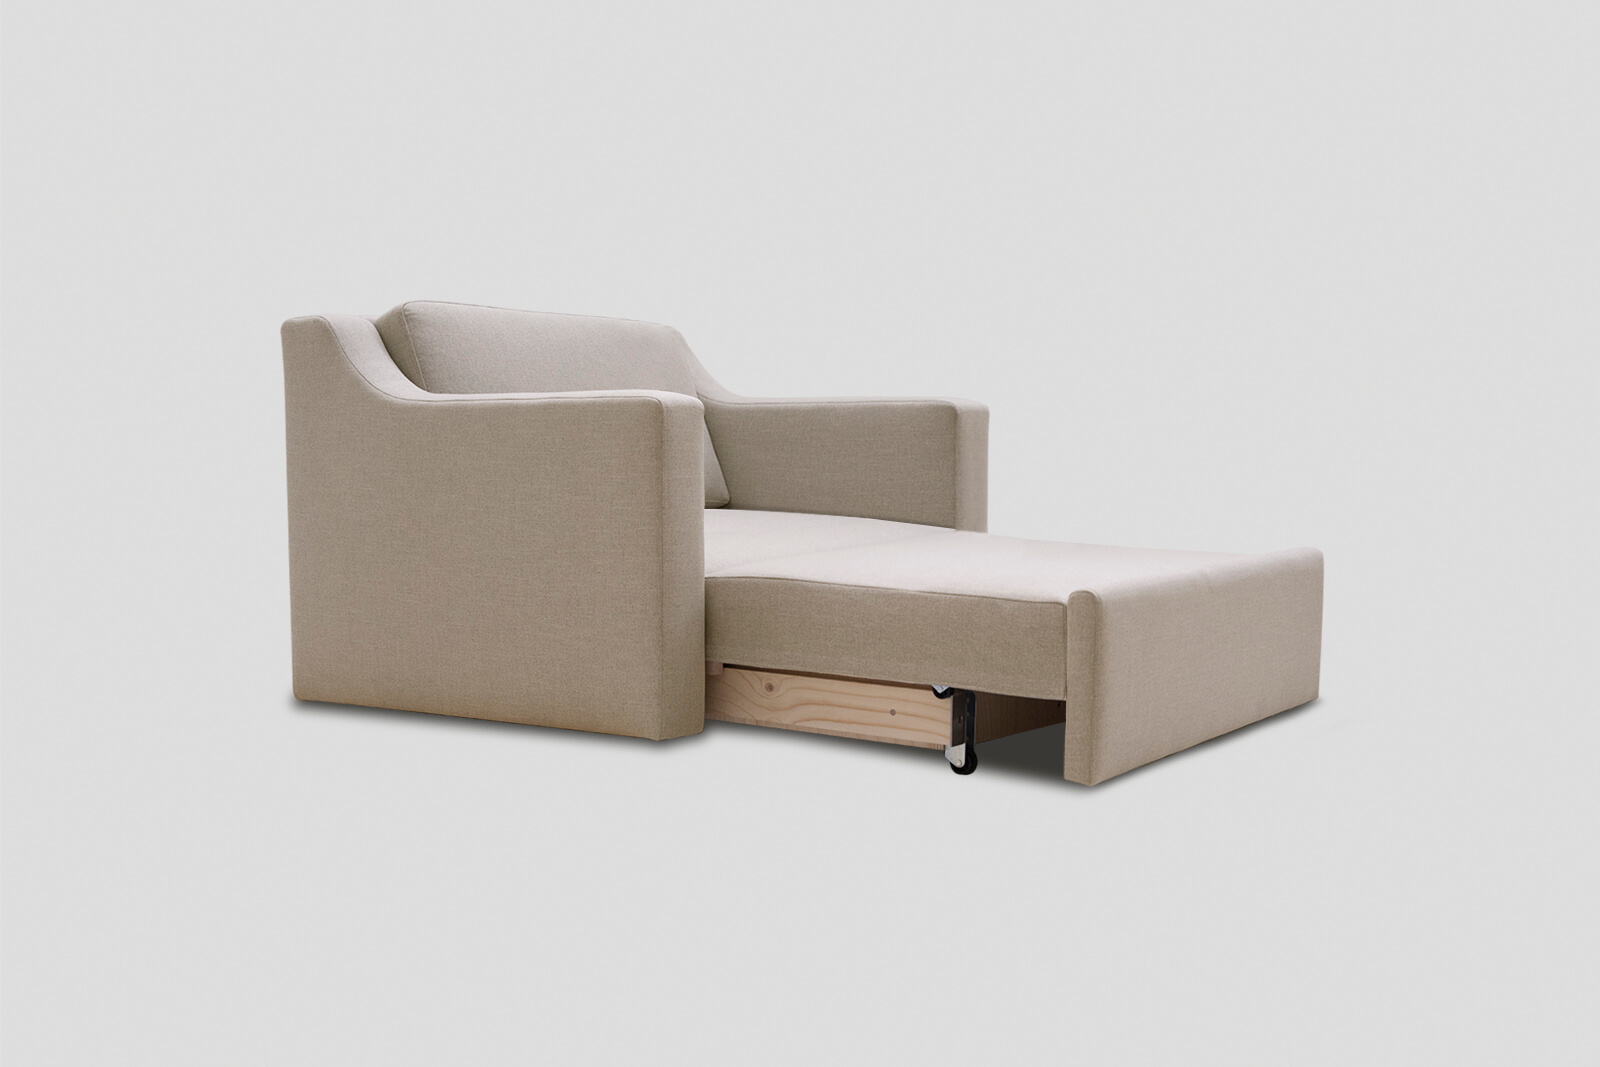 HBSB02-single-sofa-bed-coconut-3q-daybed